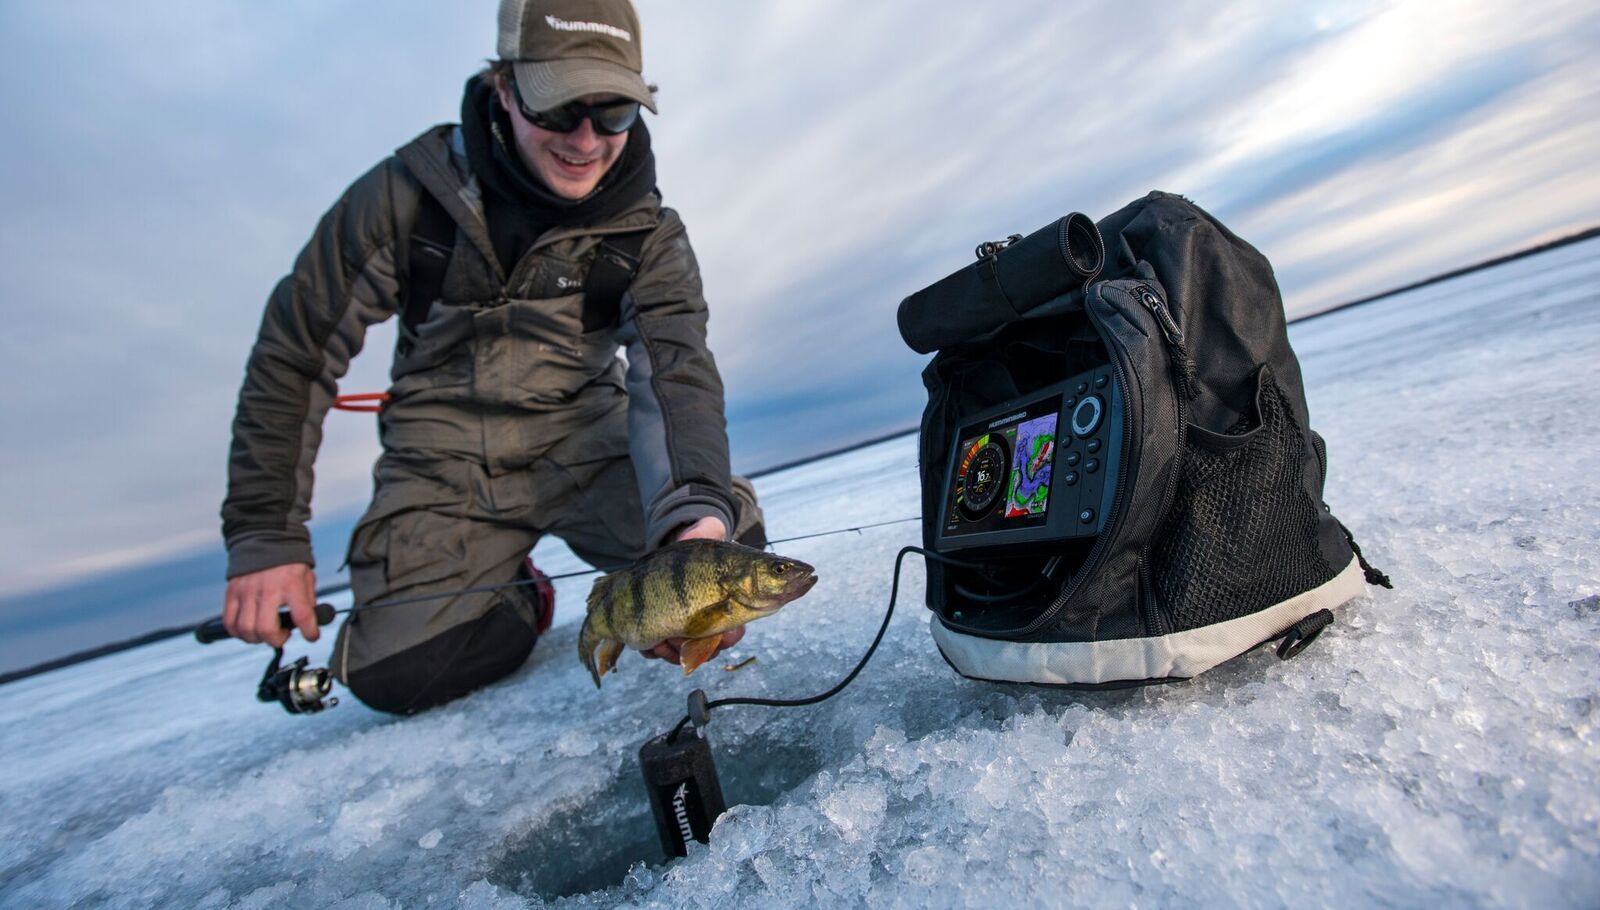 NEW HUMMINBIRD® ICE HELIX 5 AND 7 CHIRP GPS G2 SONAR UNITS GIVE